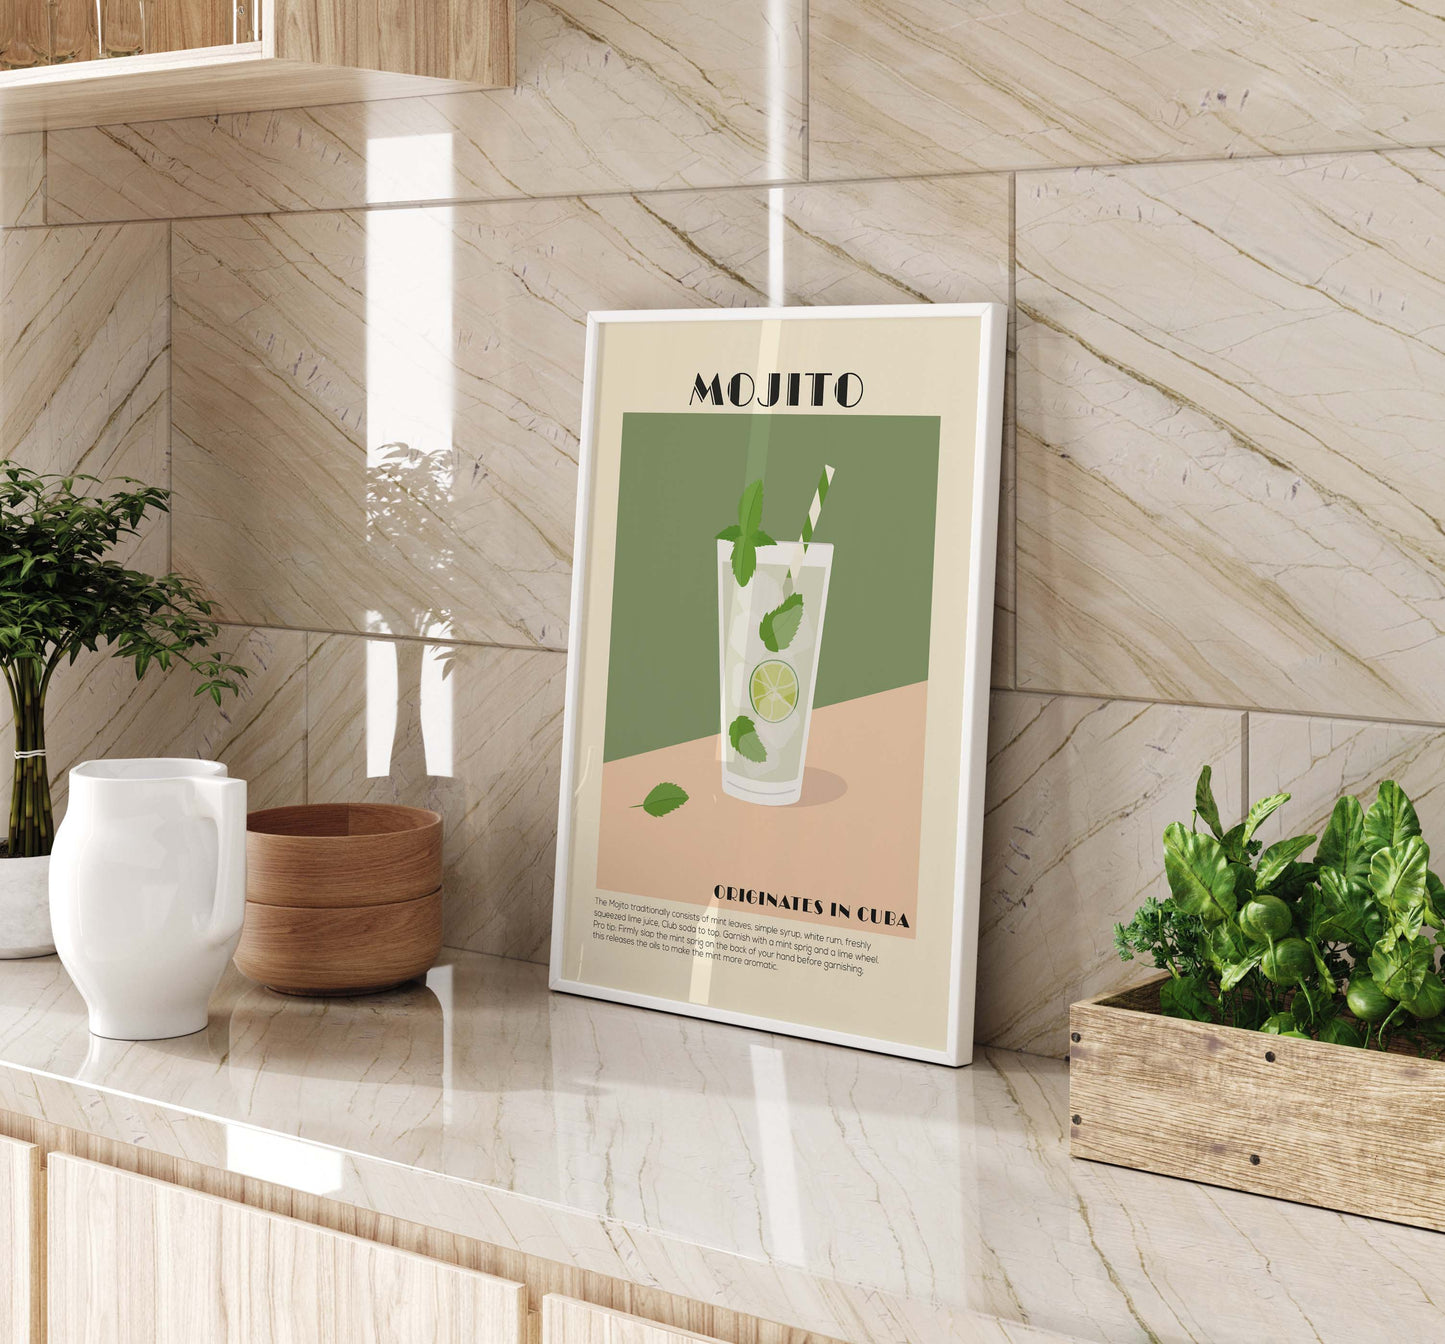 Mojito Cocktail Poster in an Art Deco Style